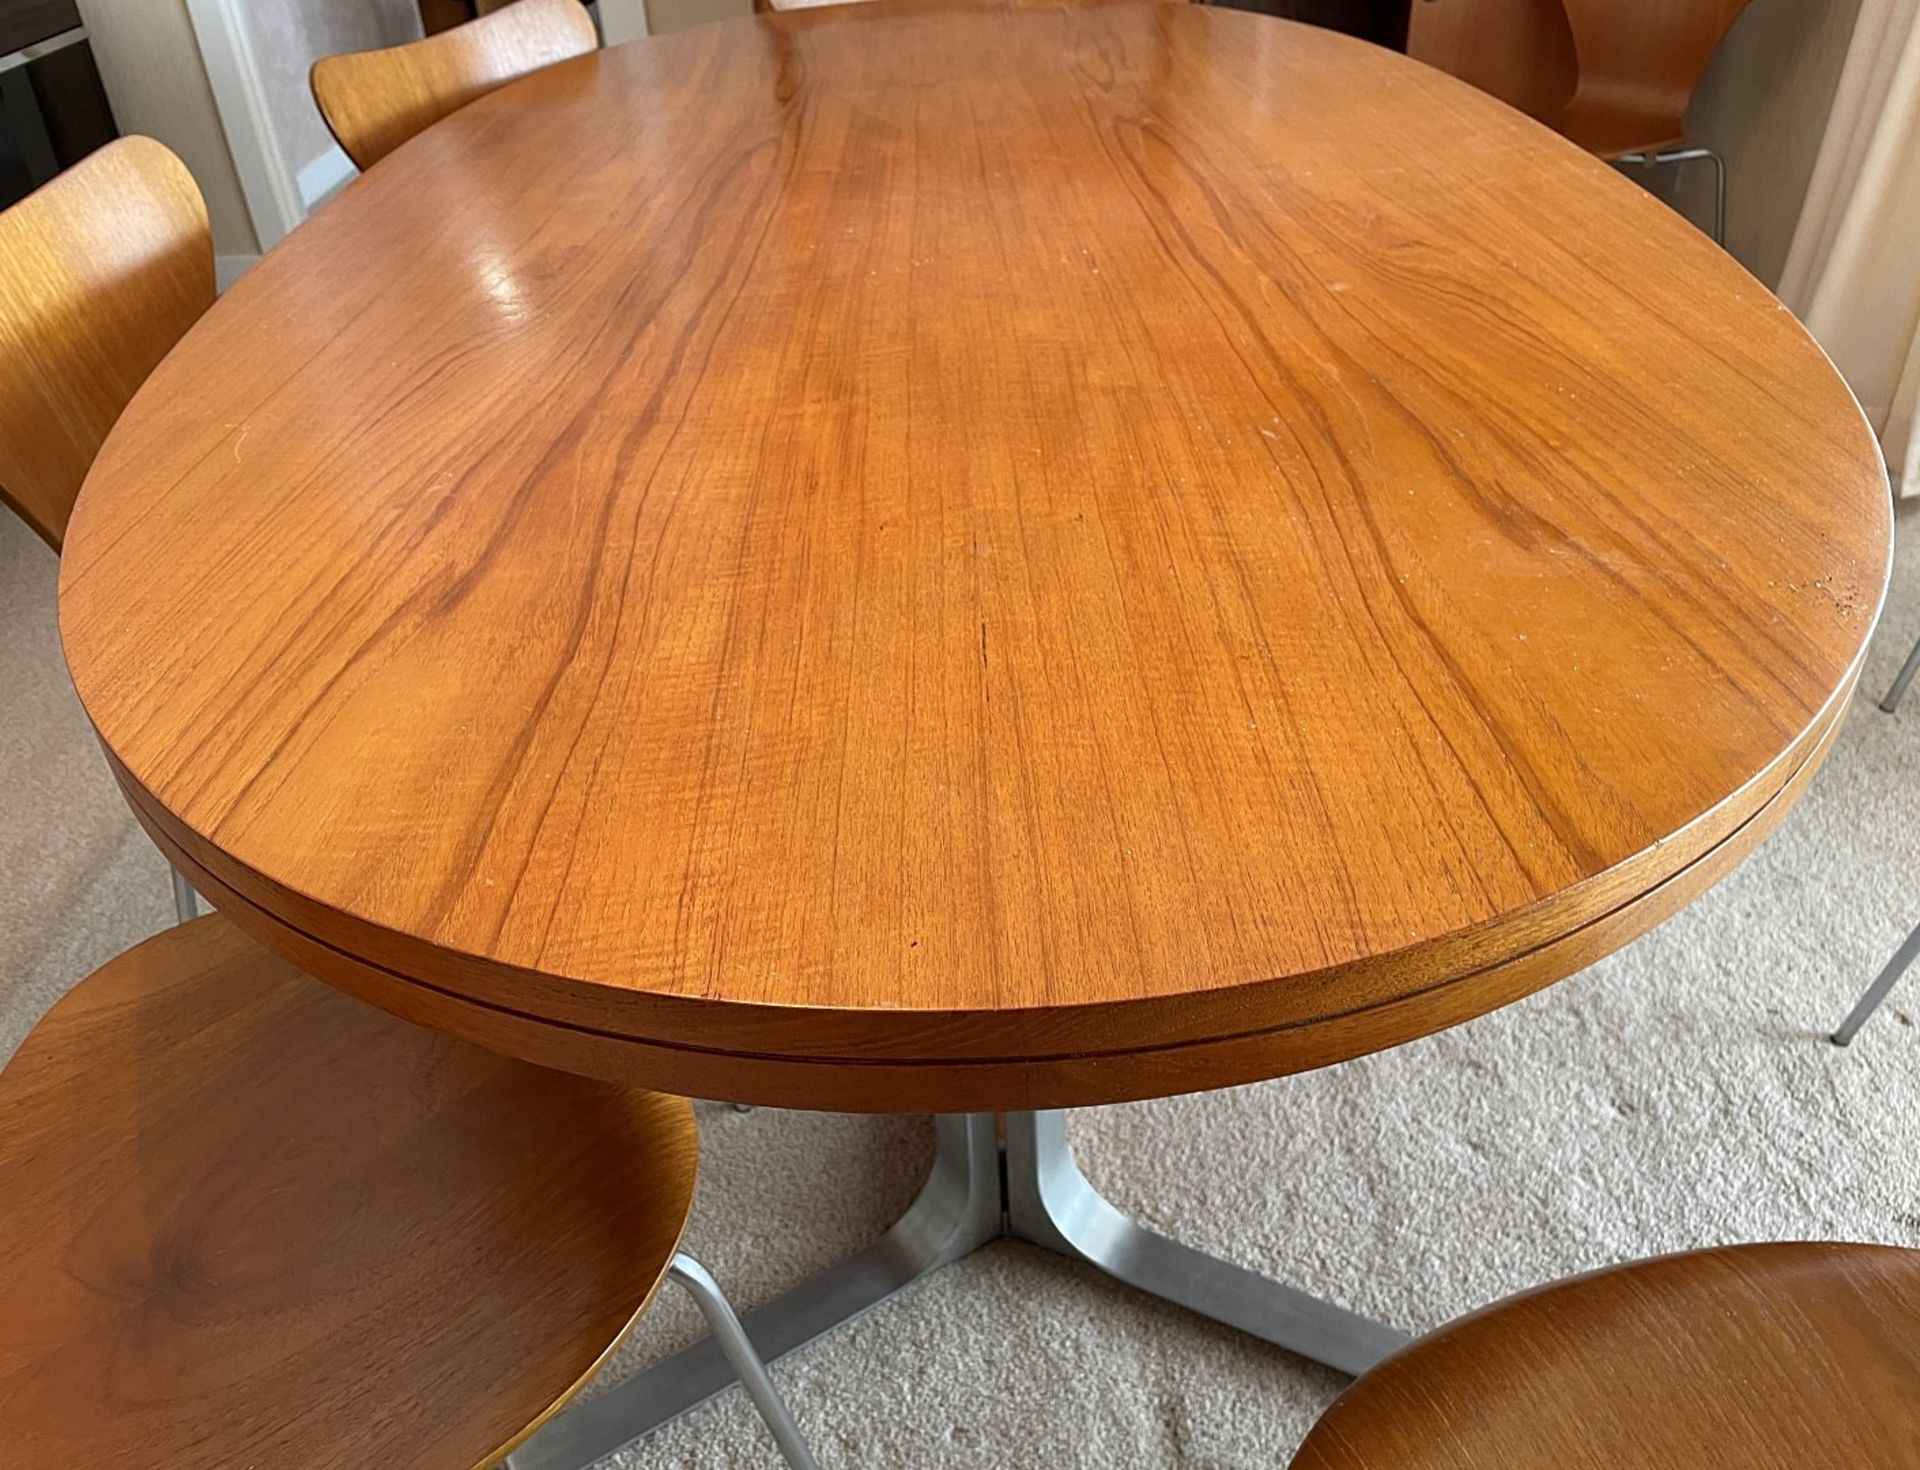 1 x Genuine Vintage FRITZ HANSEN Designer Dining Table With 8 x Chairs - Dated 1970 - Image 17 of 17